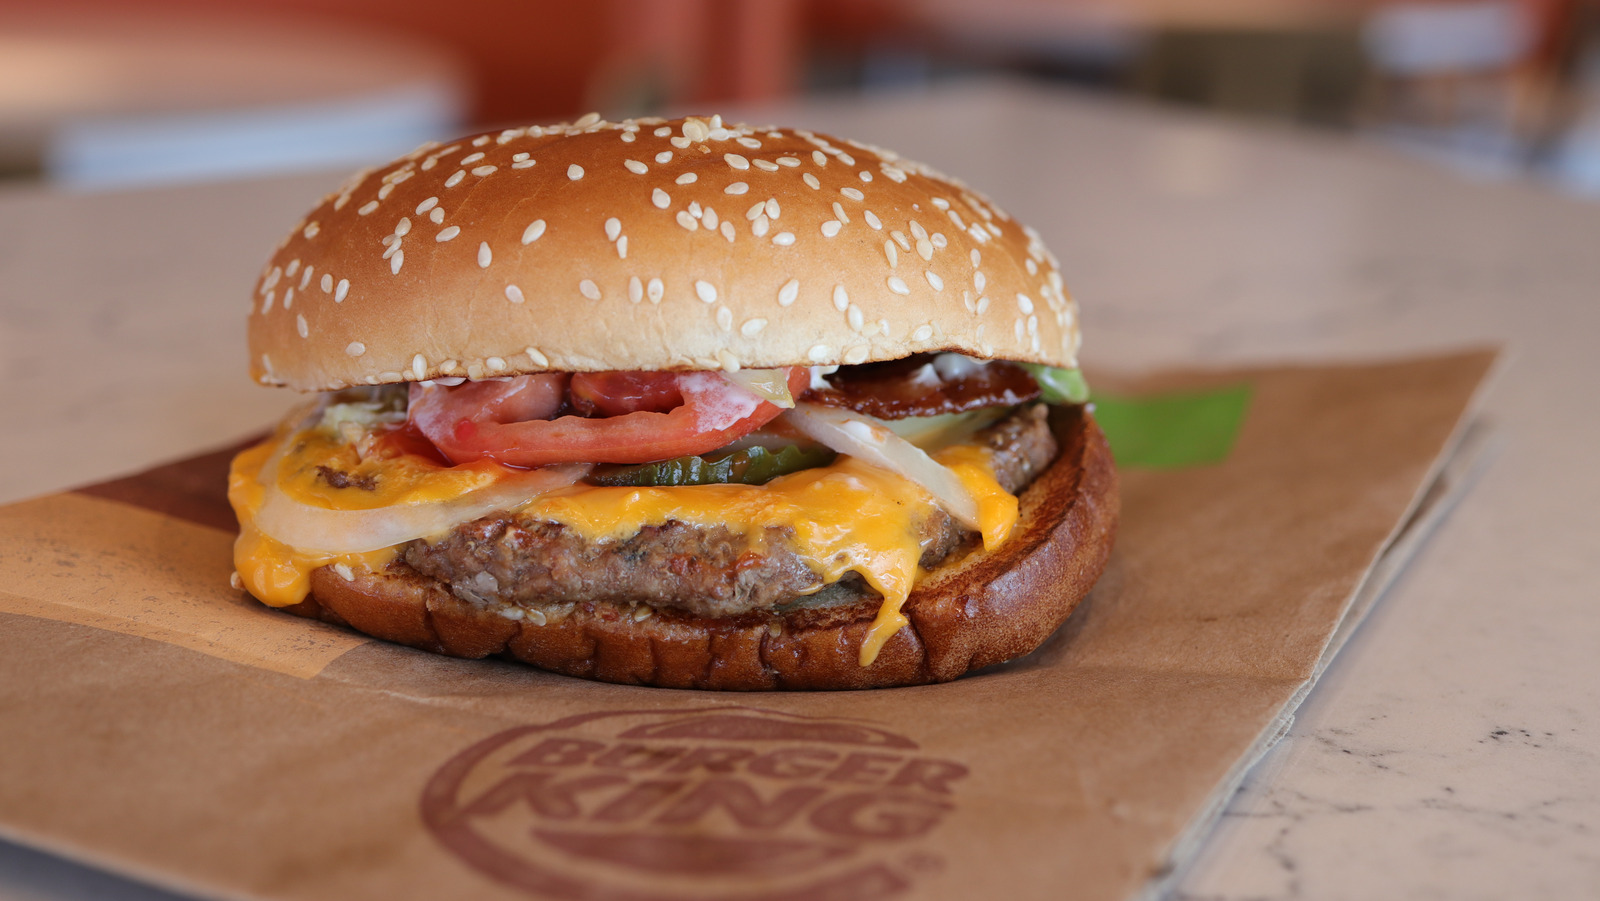 Burger King National Cheeseburger deal: How to avail, offers, and other  details revealed